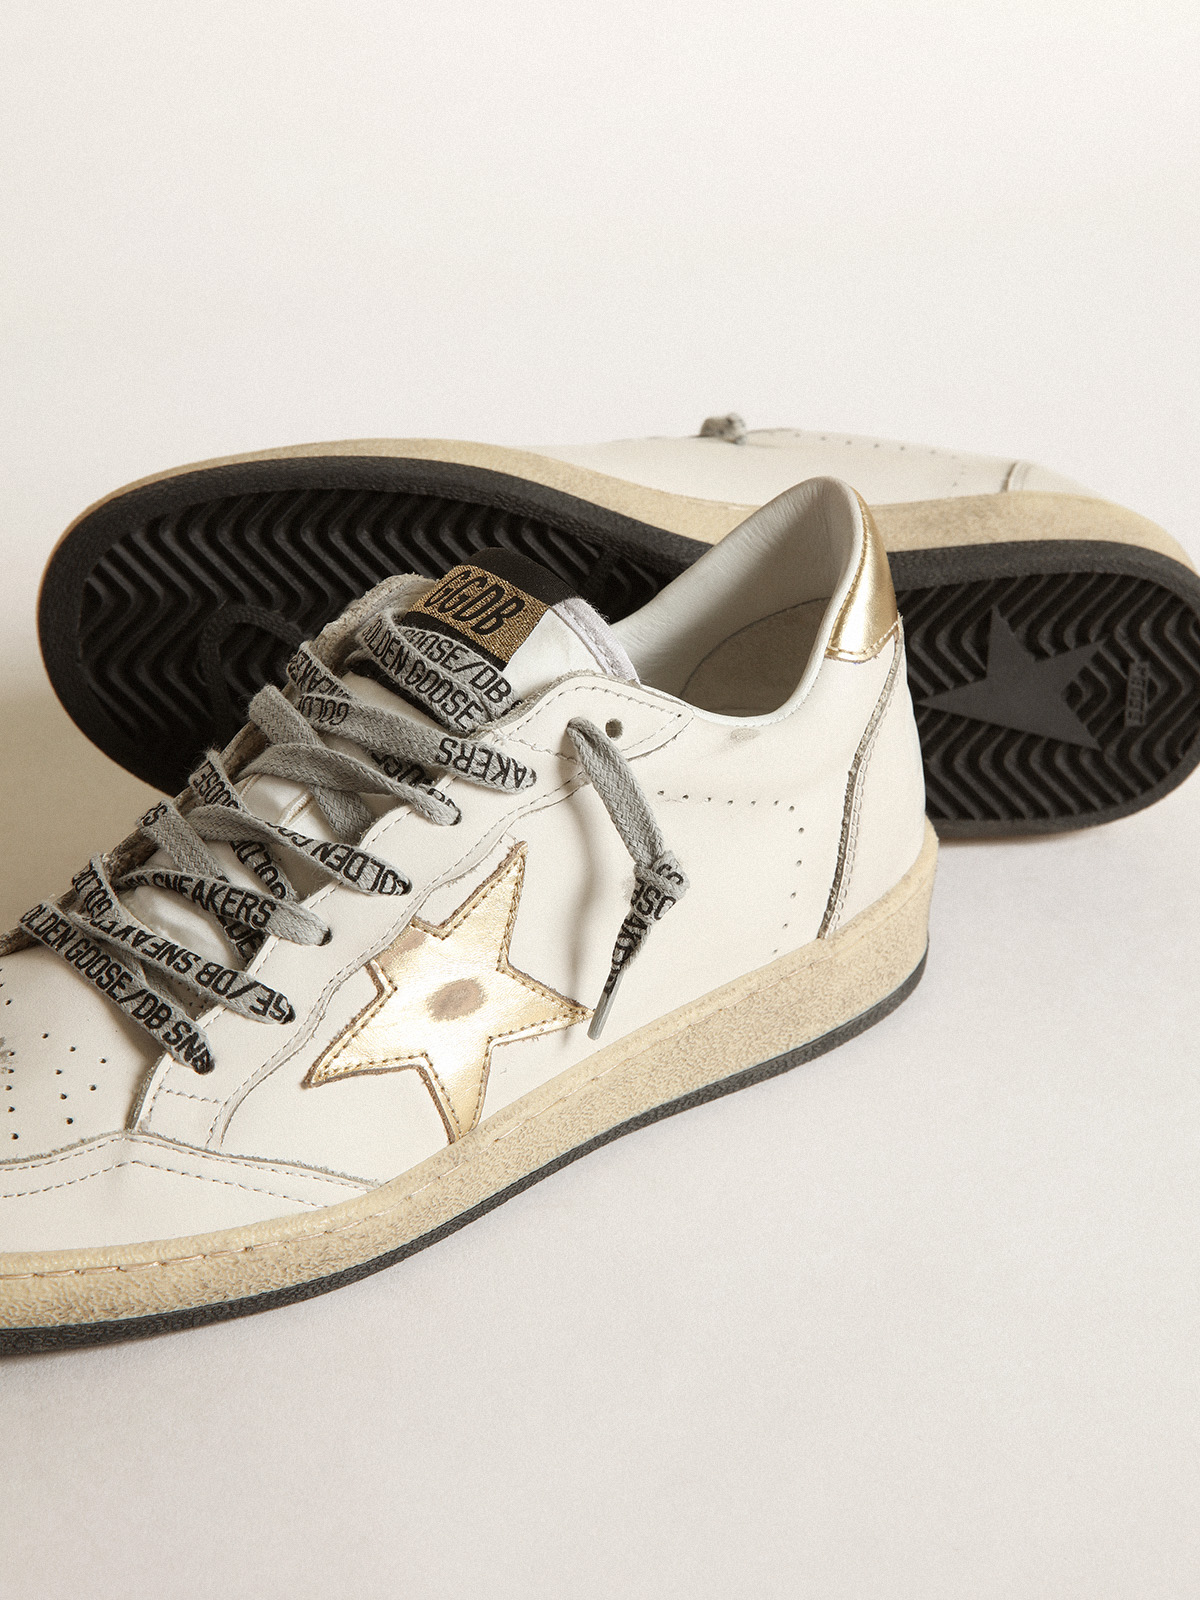 Ball Star sneakers with gold star and heel tab | Golden Goose